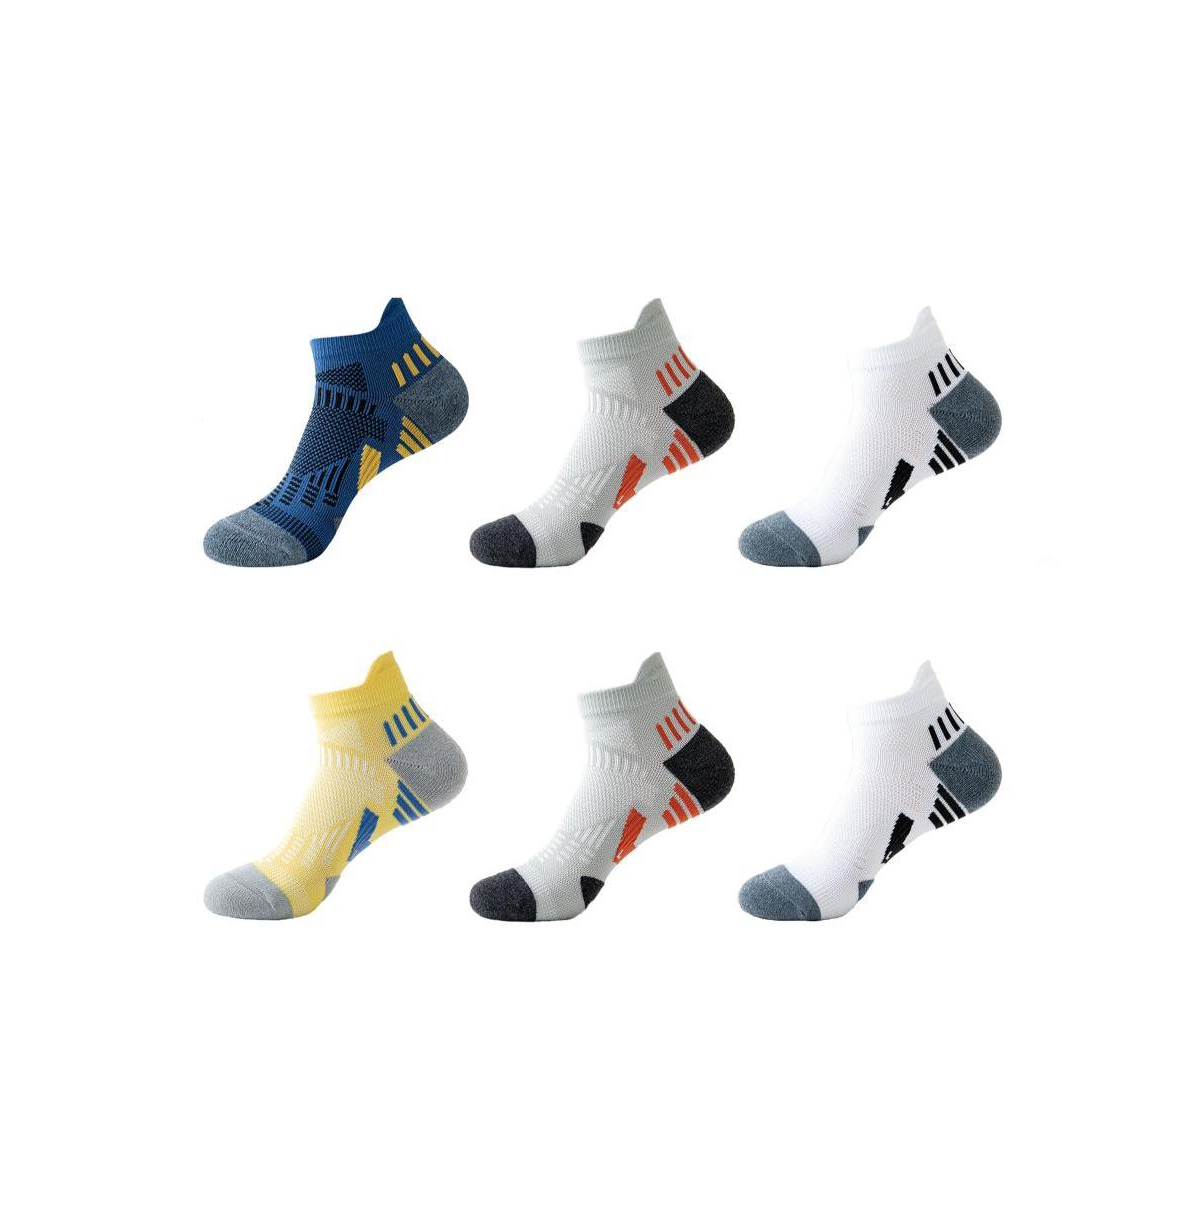 Brave man Unisex 6-Pack Recovery Arch Support Socks - White